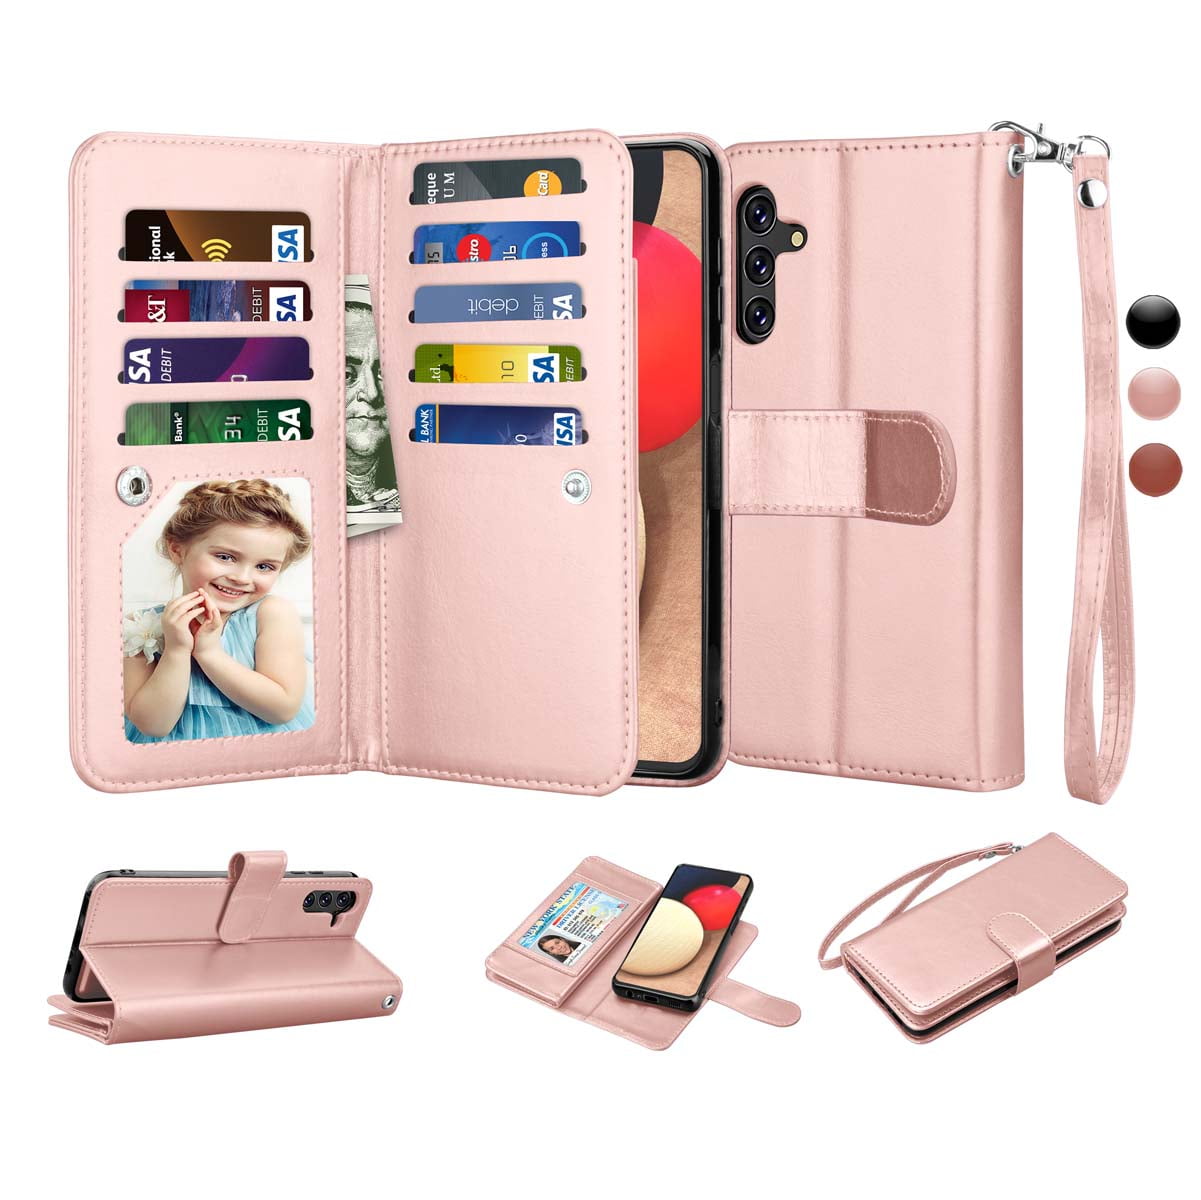 Samsung Galaxy S10 Case Shockproof 3D Premium PU Leather Flip Notebook Wallet Case with Magnetic Stand Card Holder Slot Folio TPU Bumper Protective Phone Case for Samsung Galaxy S10 Cat & Tiger